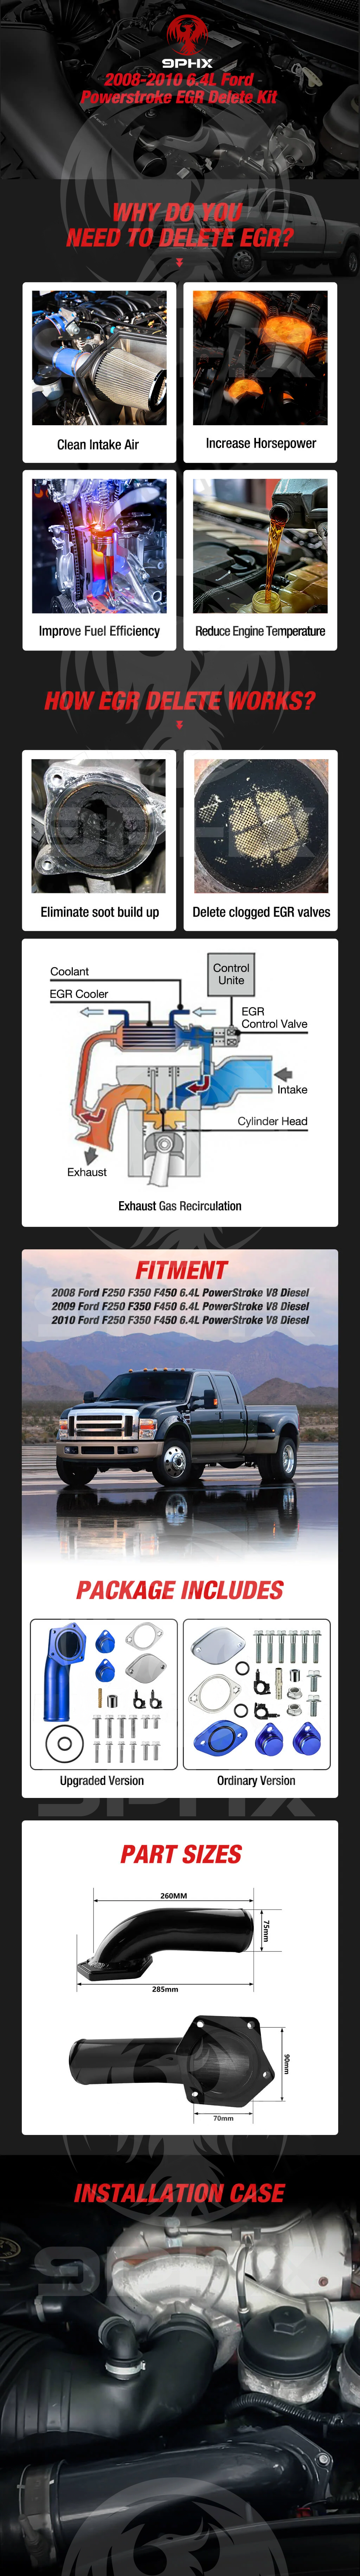 9PHX 6.4L Powerstroke V8 Diesel EGR Delete Kit with High Flow Intake Elbow for 2008 2009 2010 Ford F250 F350 F450 F550